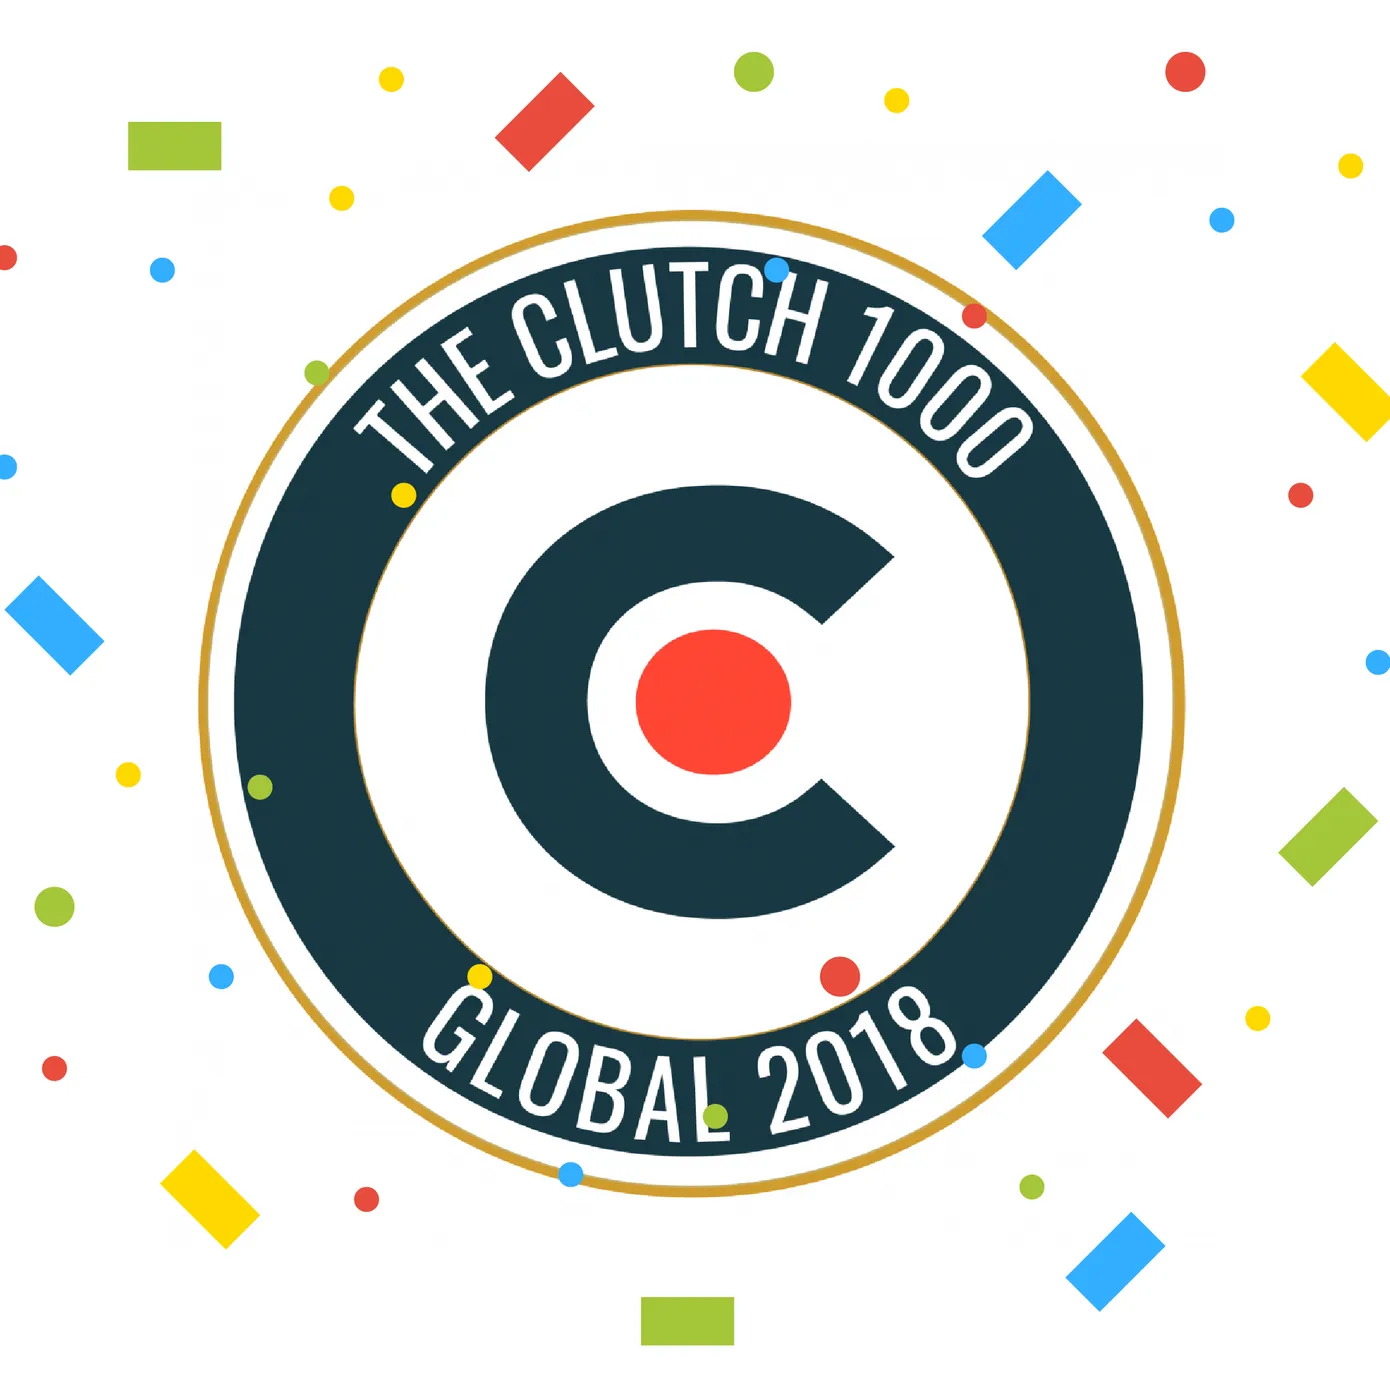 Cleveroad ranked among the Exclusive 2018 Clutch 1,000 companies